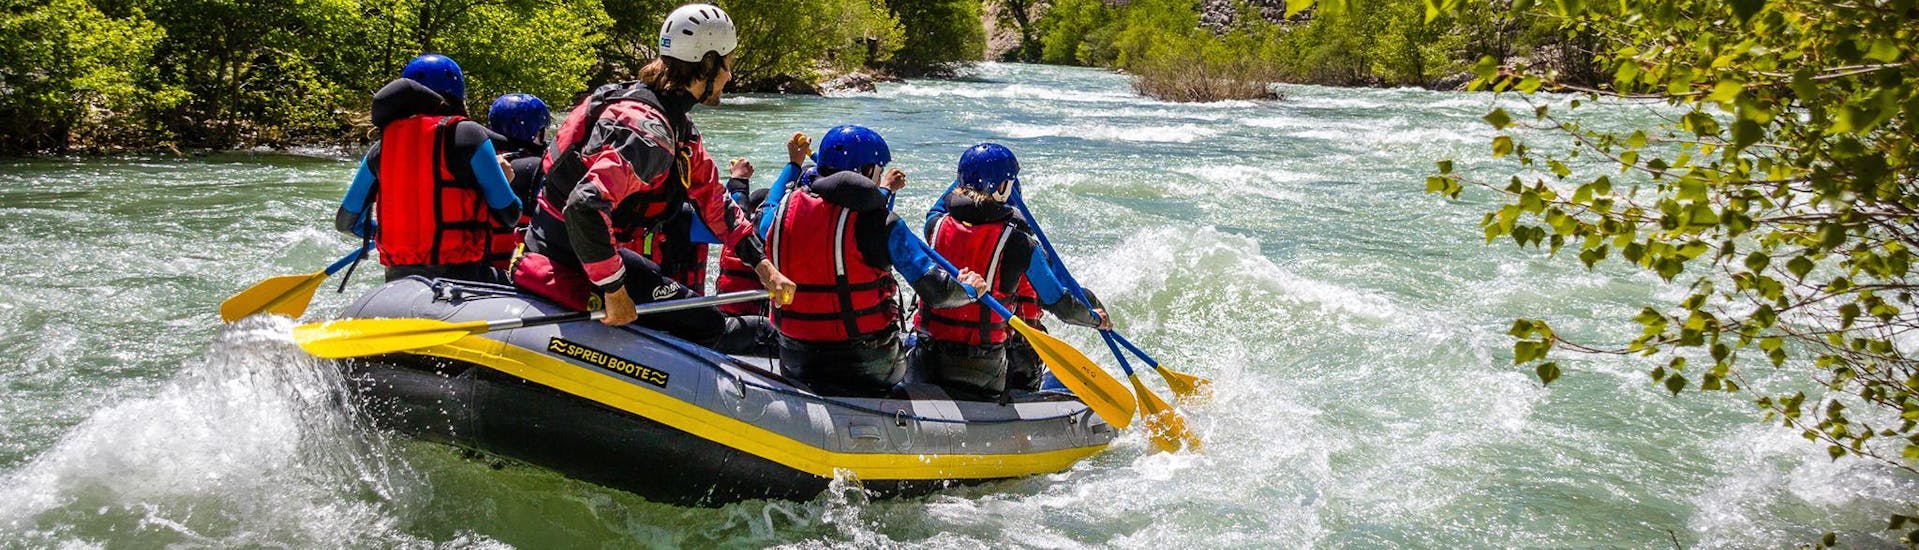 Action photo during Rafting on the Verdon - Discovery with Raft Session Verdon.